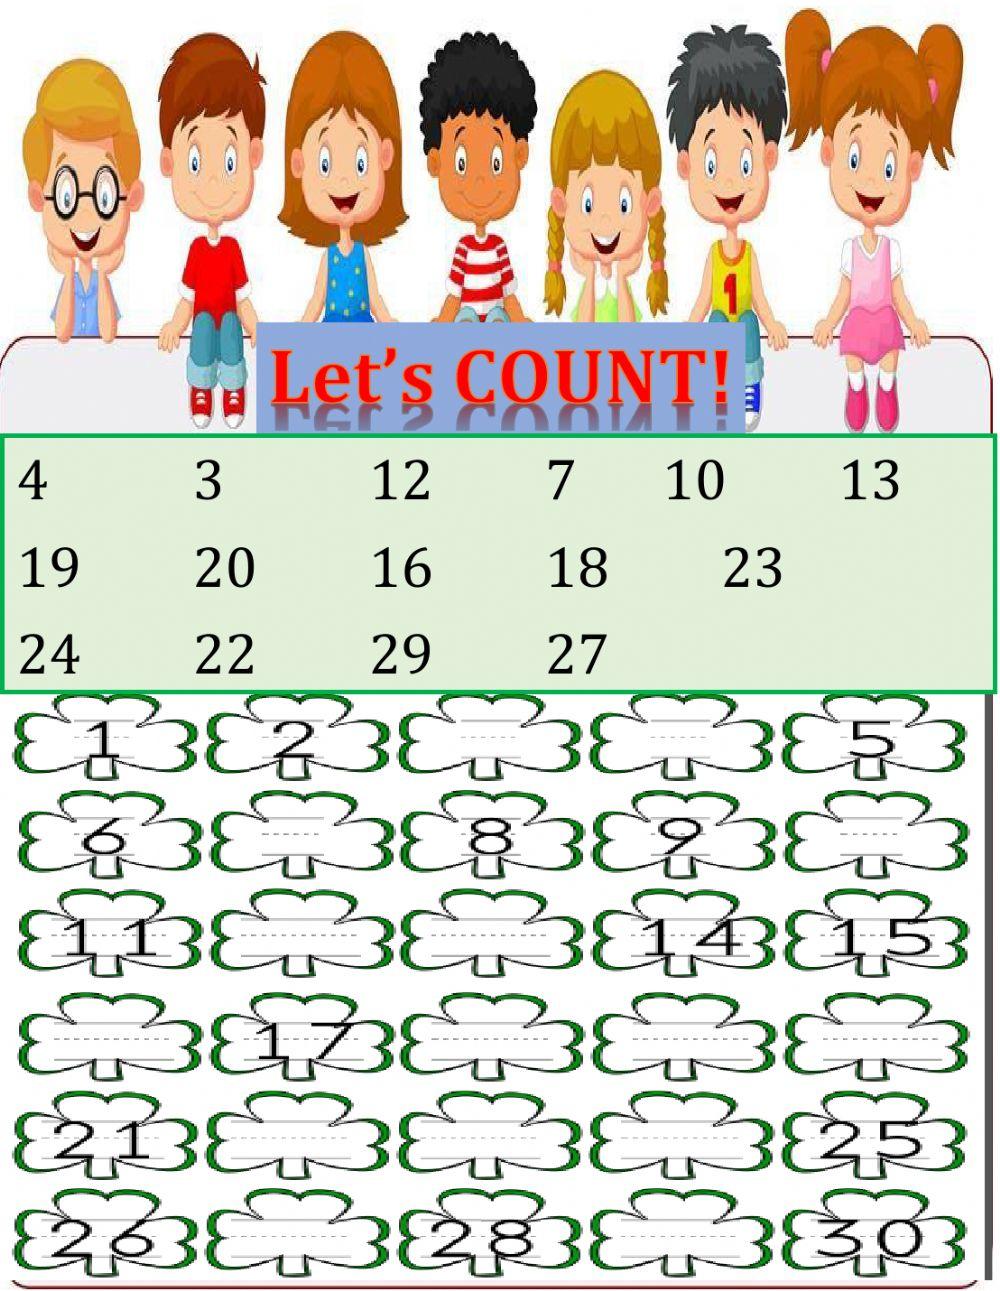 Counting 1-30